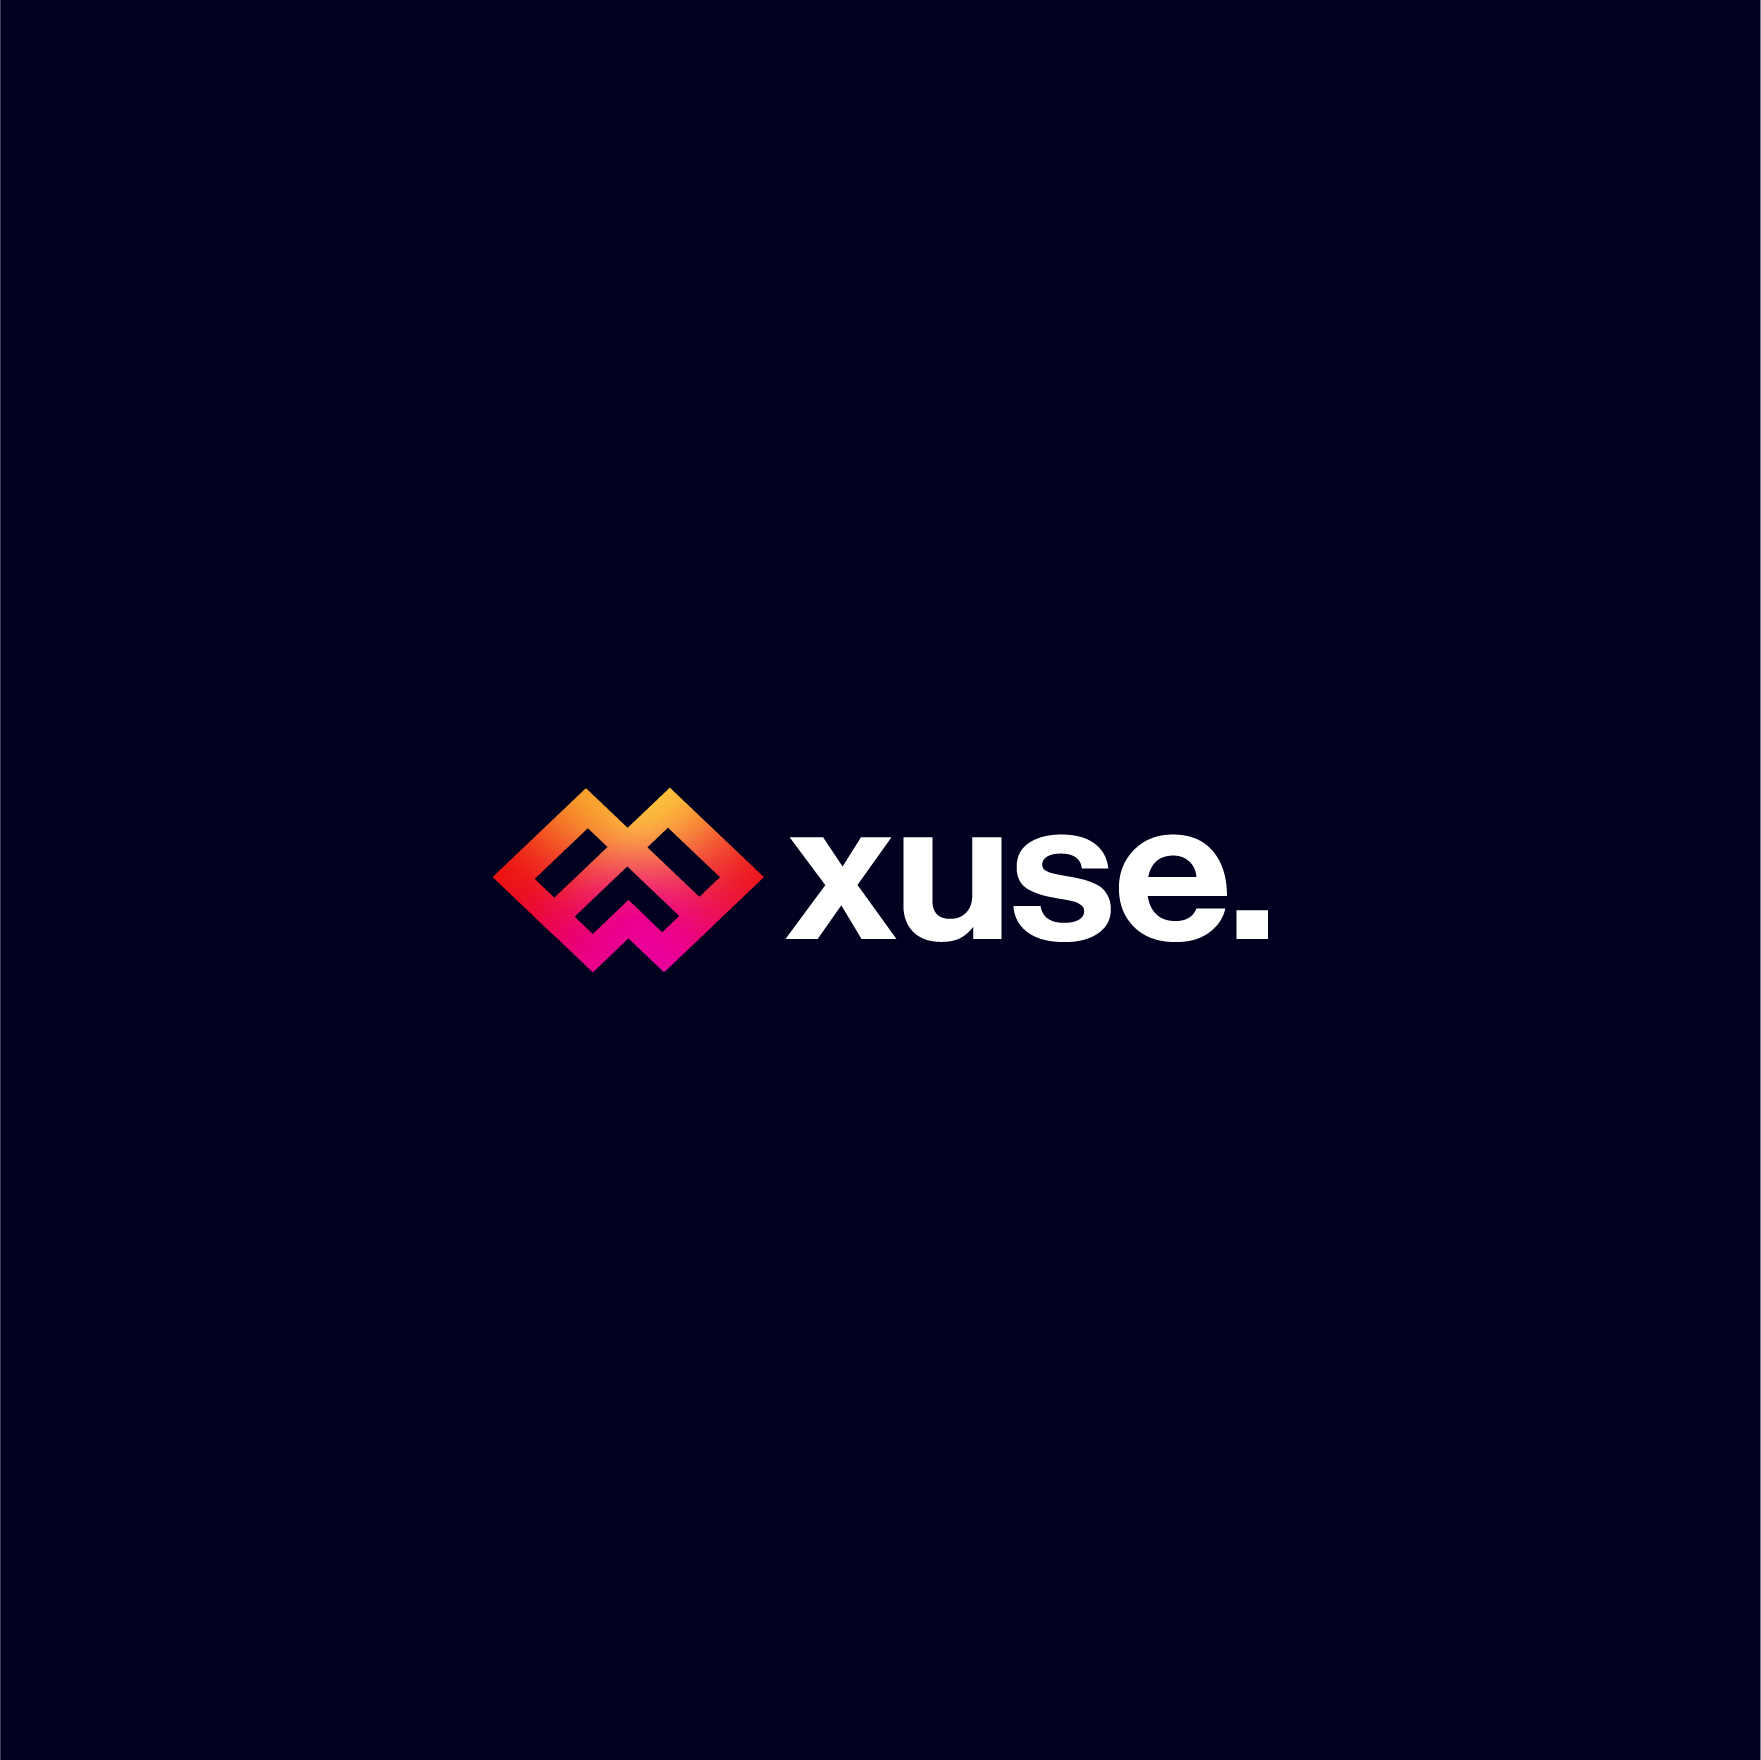 The Brand Elite Studios Design Xuse Brand Identity for Stable Currency Solution for Businesses